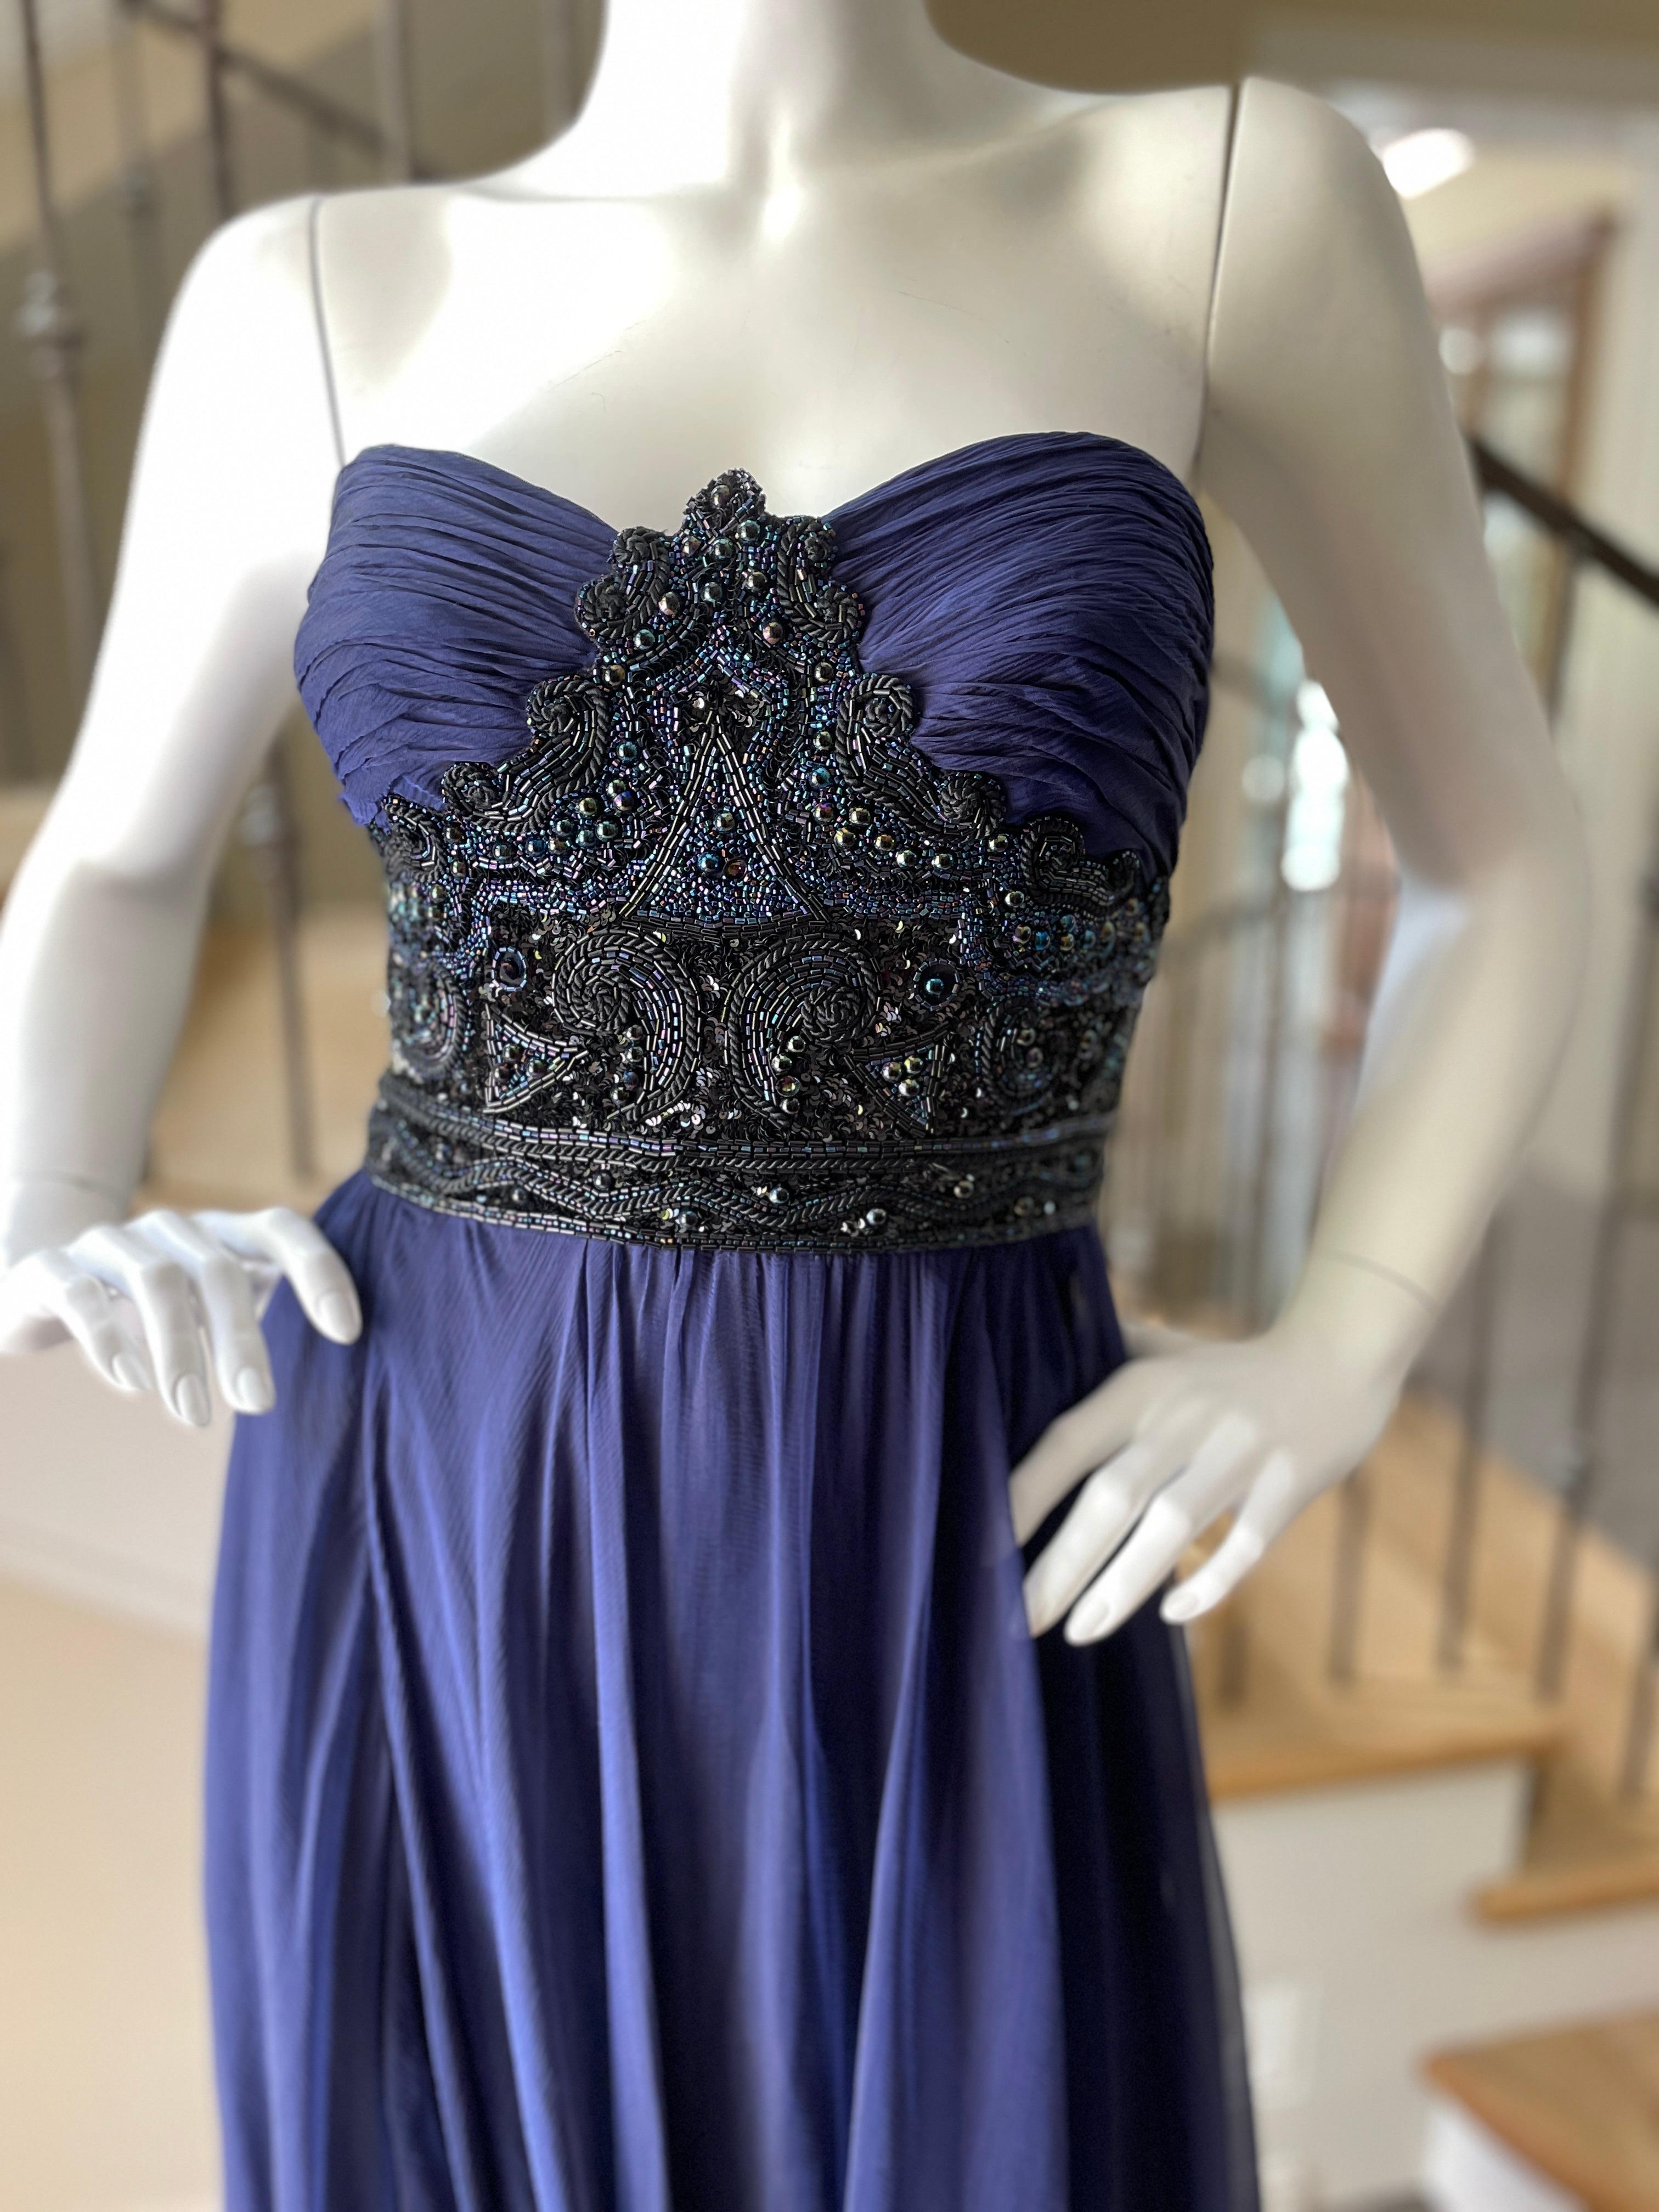 1980s ball gown